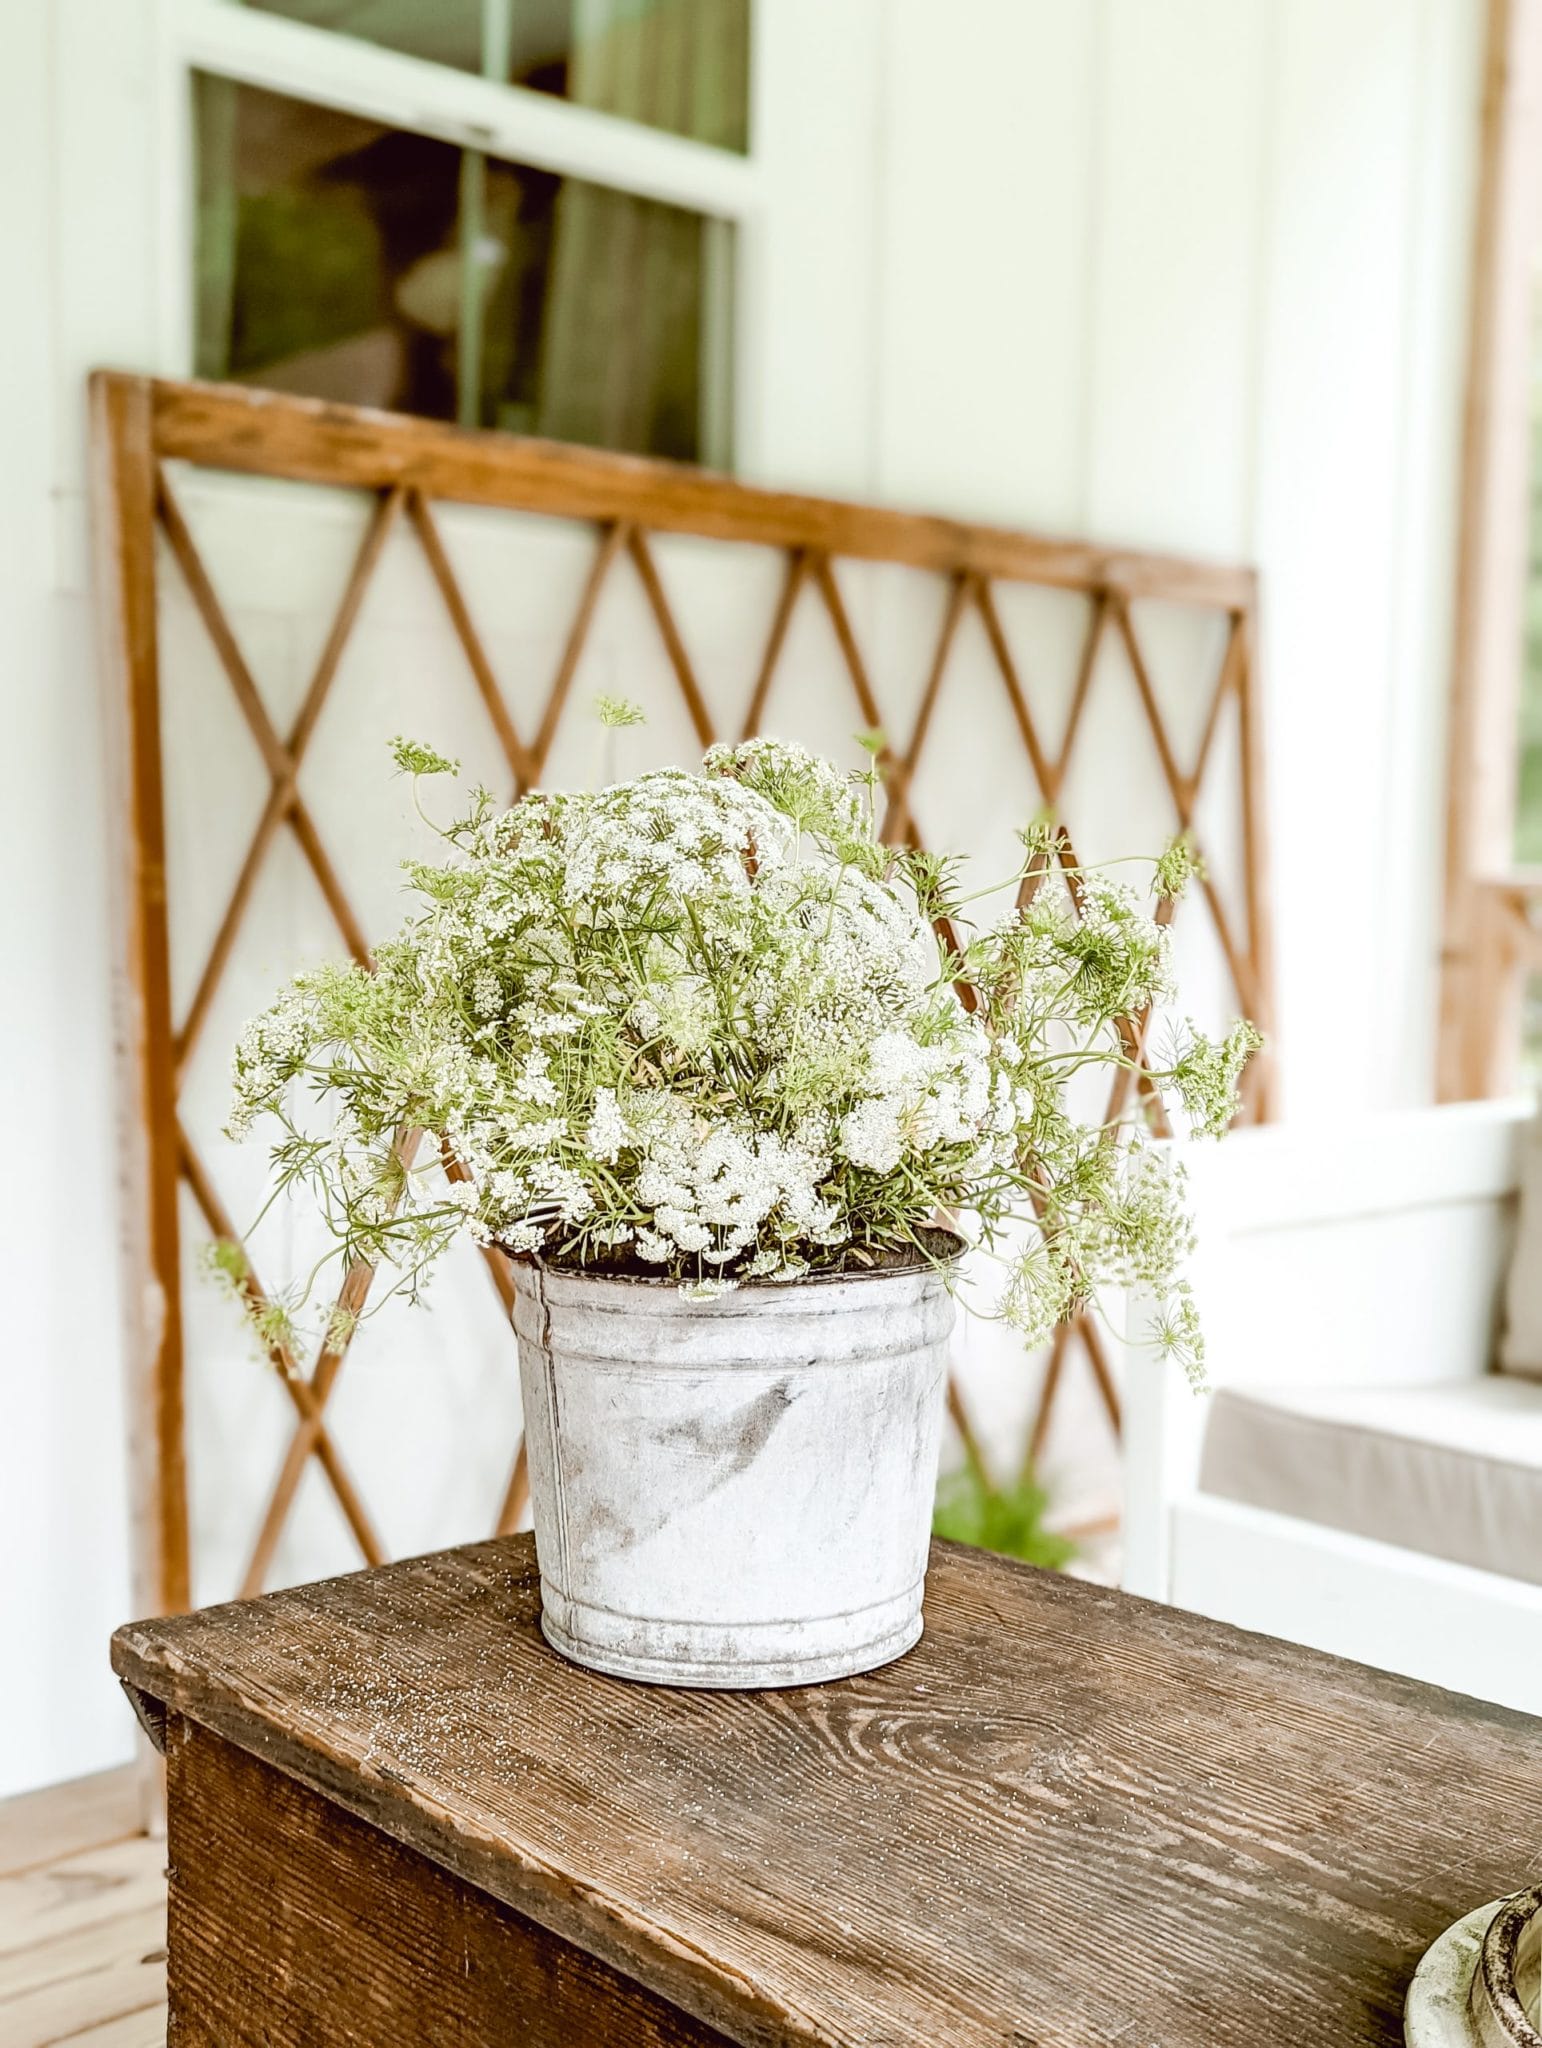 queen anne's lace flowers arranged in a galvanized bucket sitting on an old wooden trunk coffee table